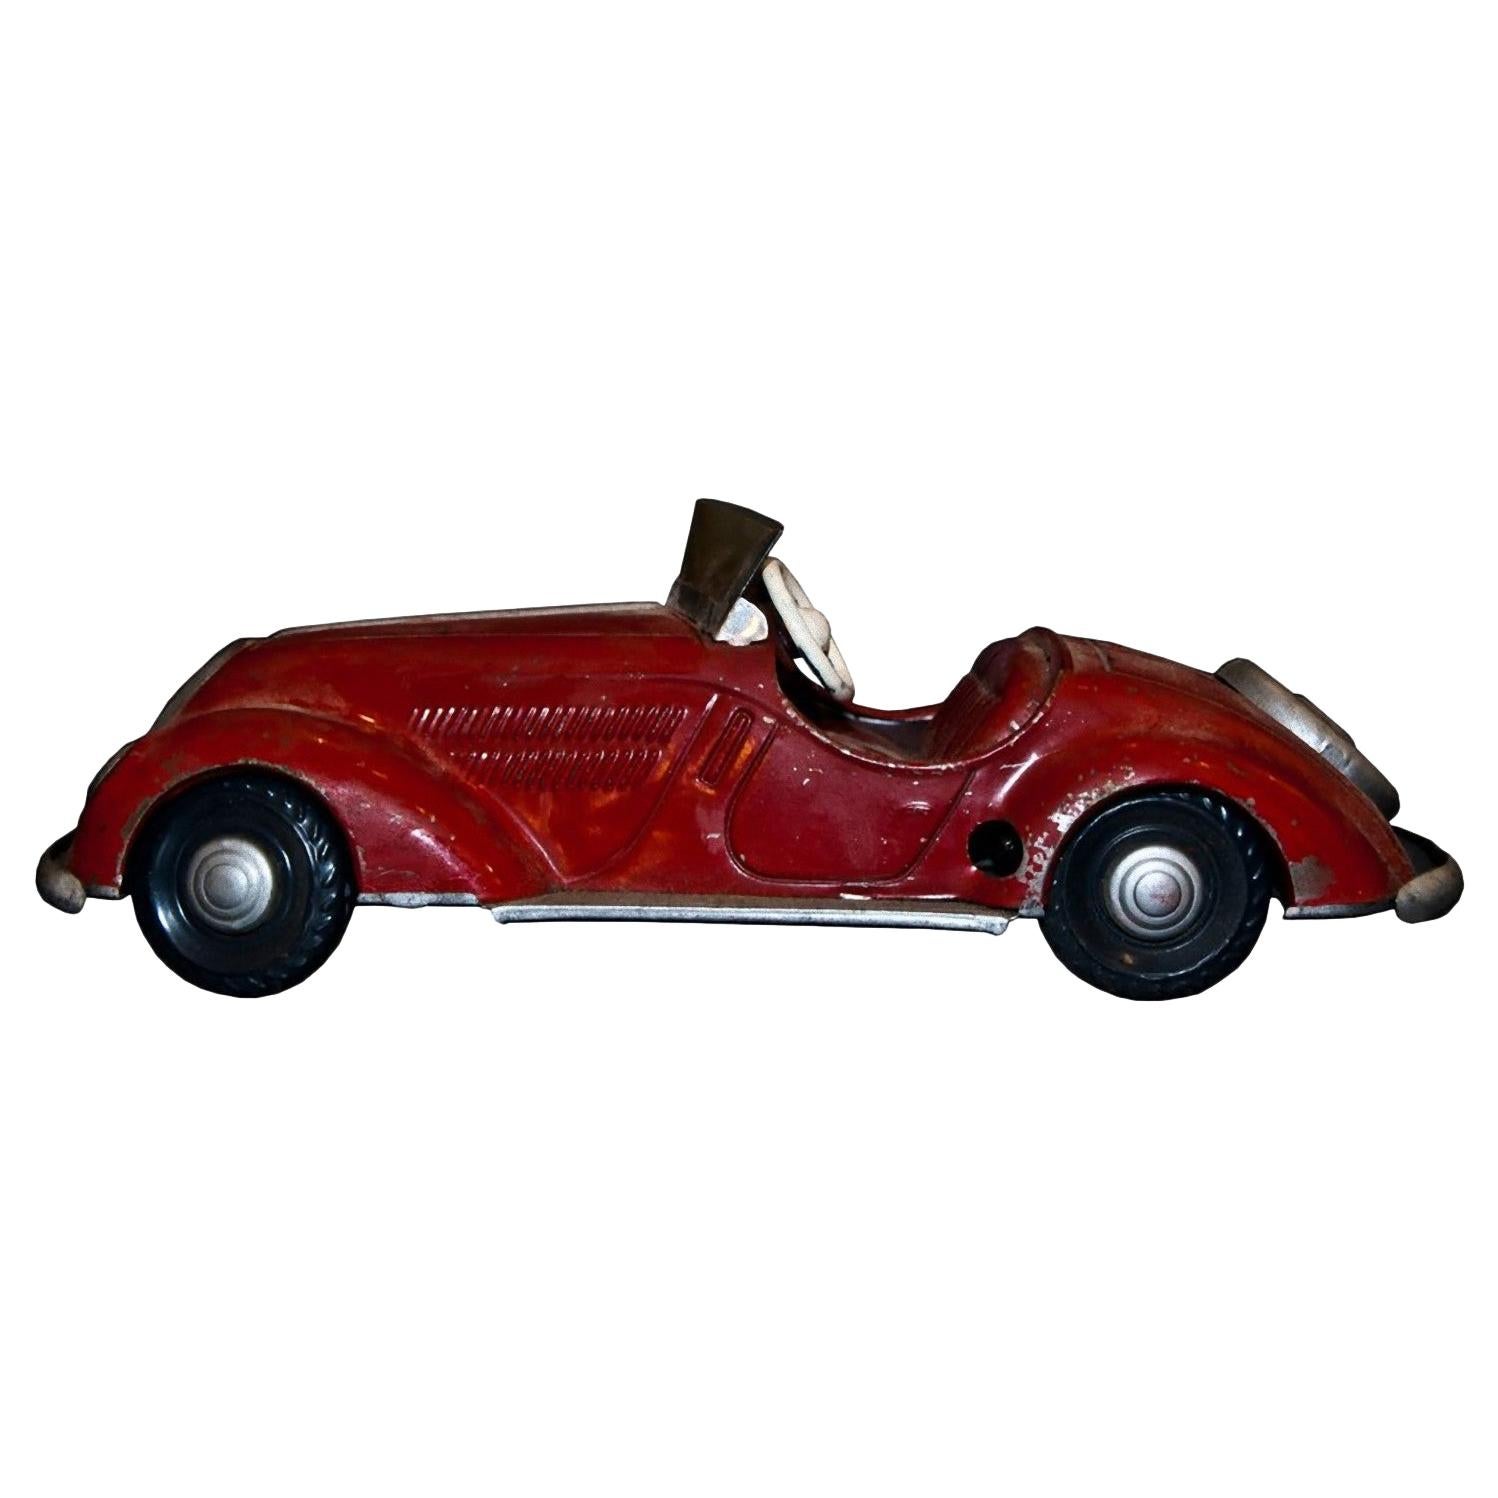 Vintage Toy, Wind Up Big Size Car, Mid-20th Century